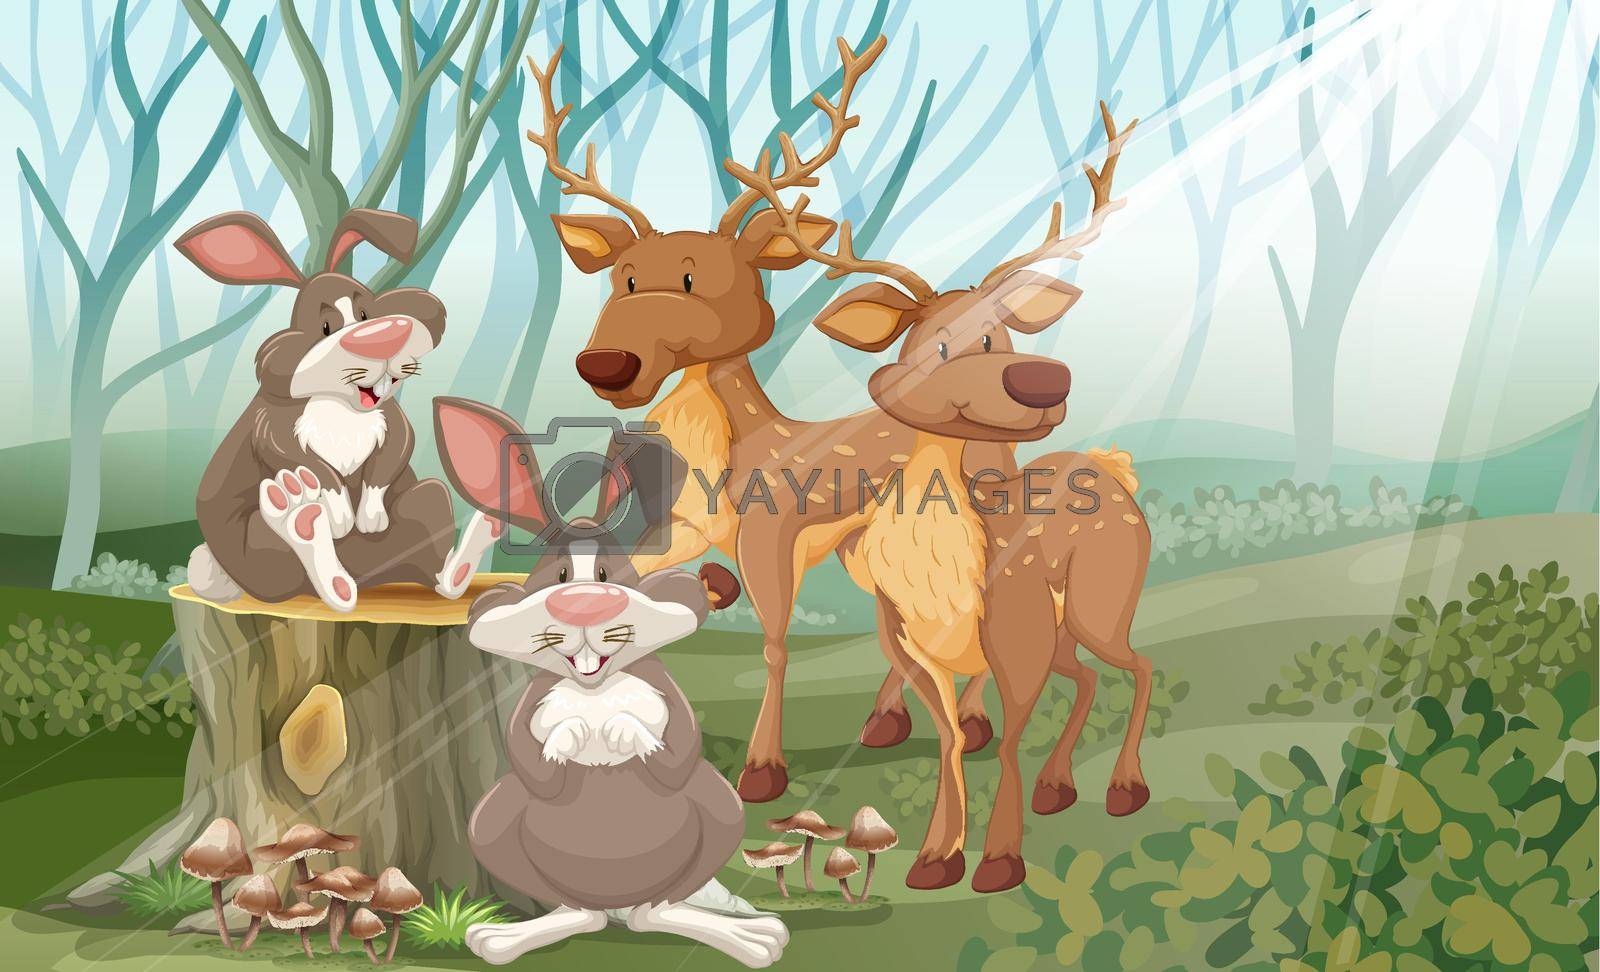 Rabbits and deer in a forest